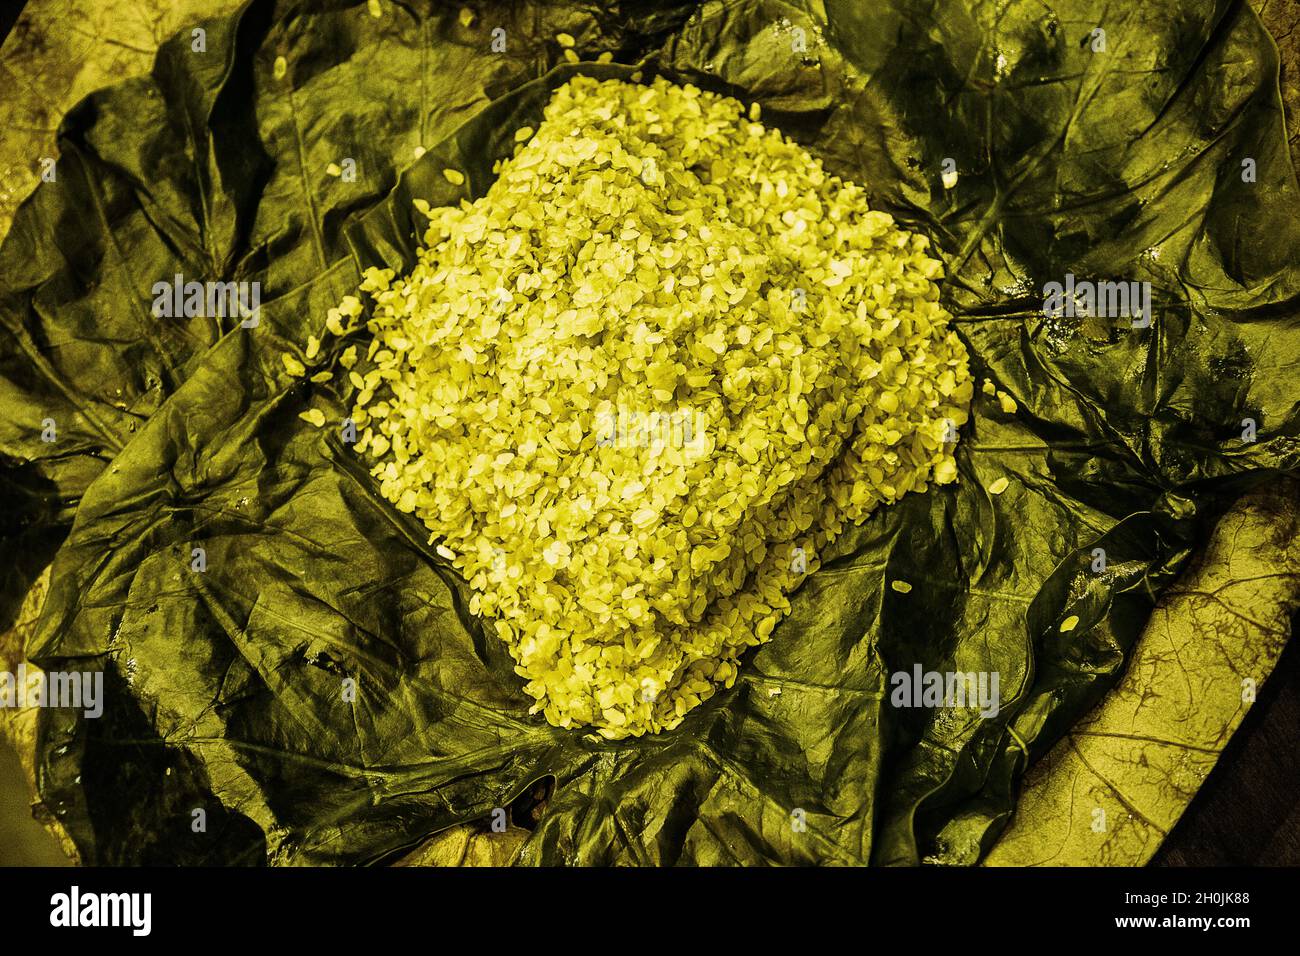 Green rice or green sticky rice grown in northern vietnam. Stock Photo